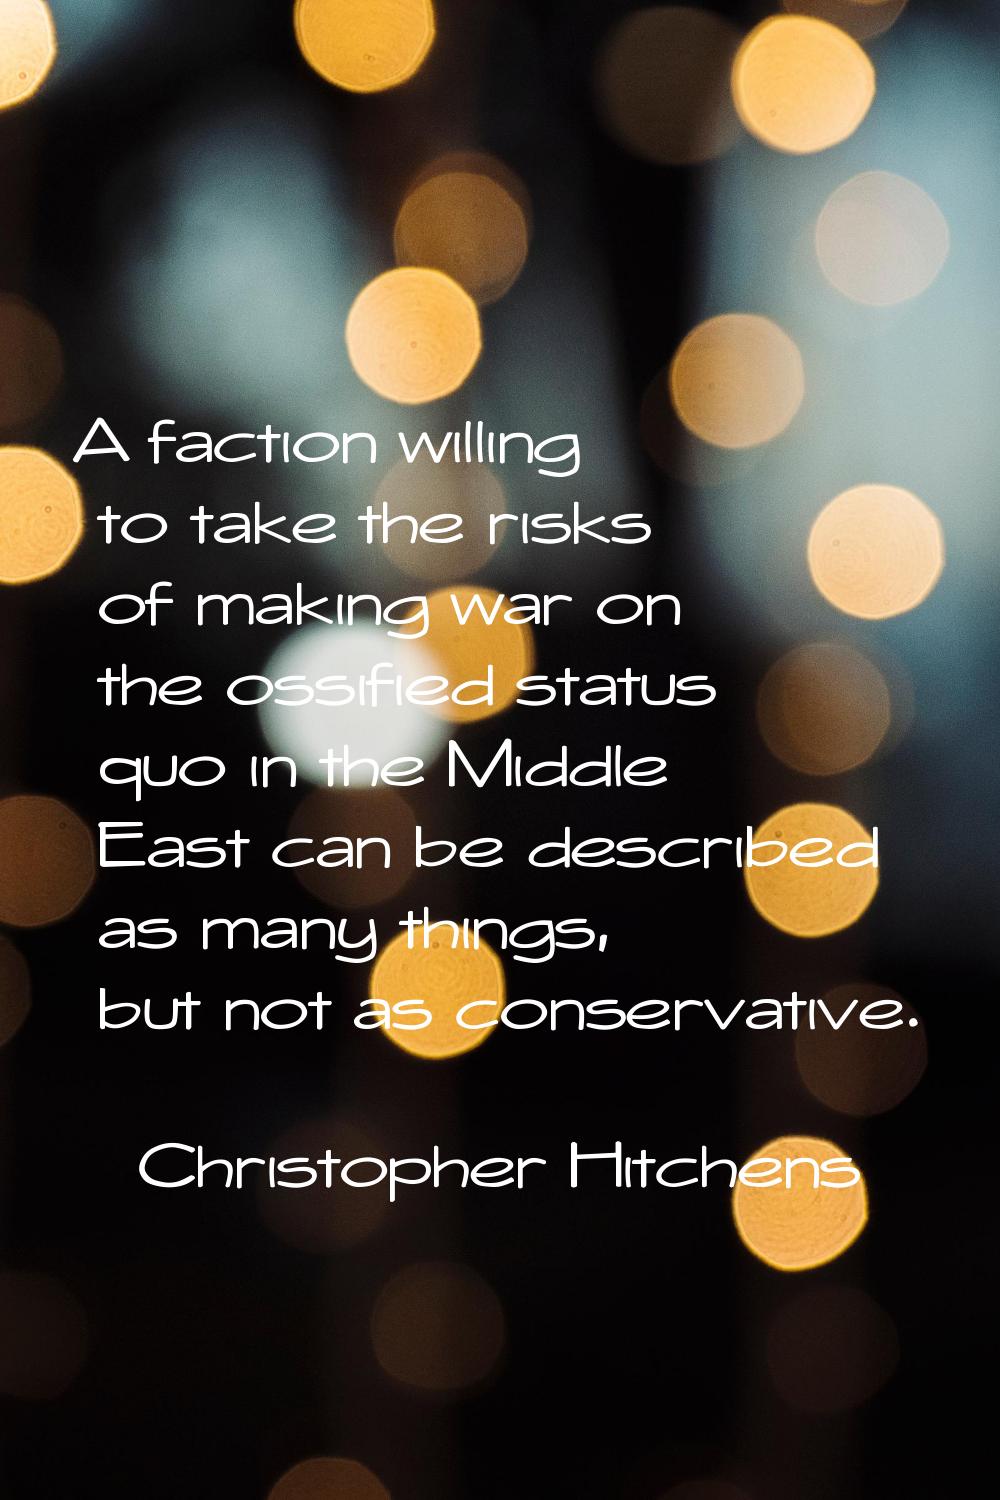 A faction willing to take the risks of making war on the ossified status quo in the Middle East can